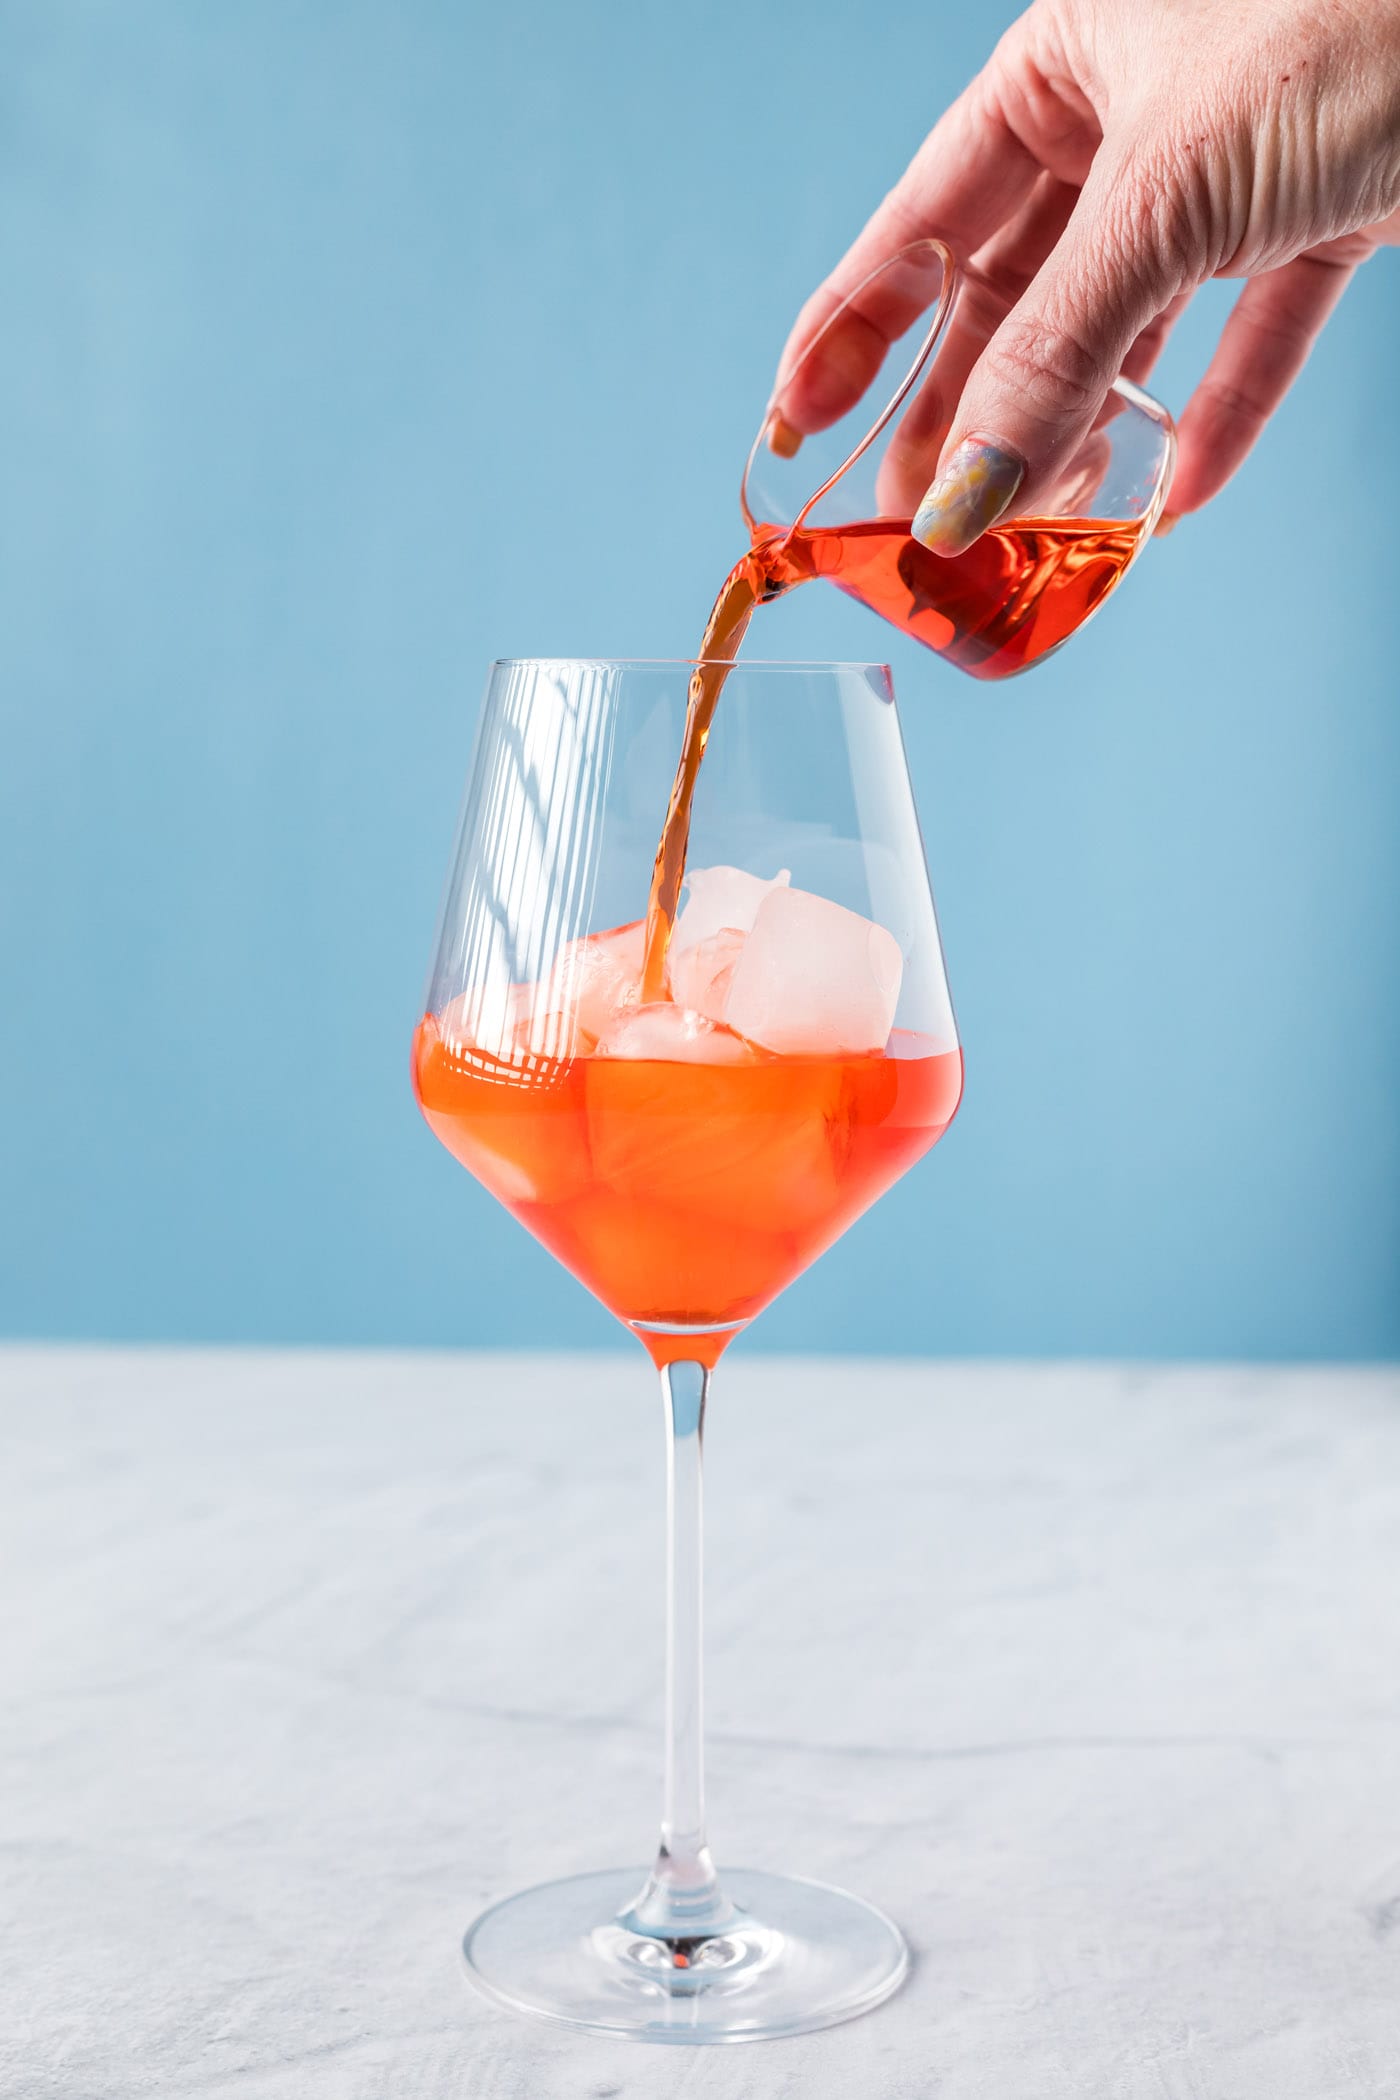 pouring Aperol into a wine glass with ice